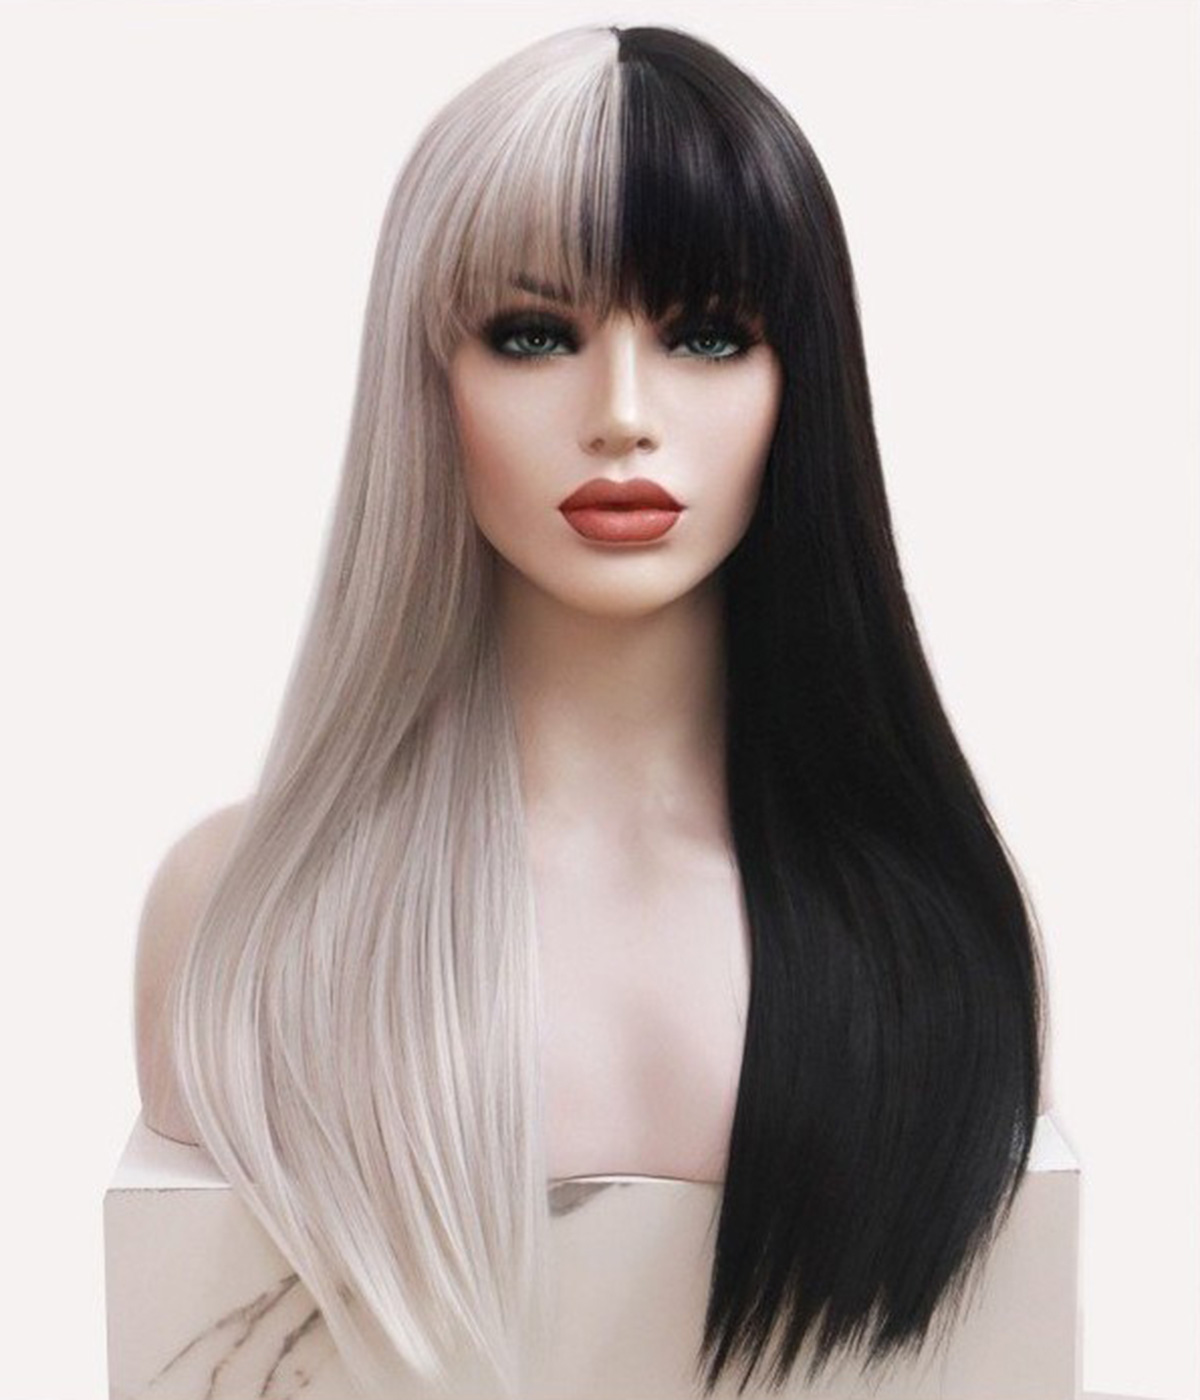 Hard Front Half Silver and Half Black Long Straight Synthetic Wig